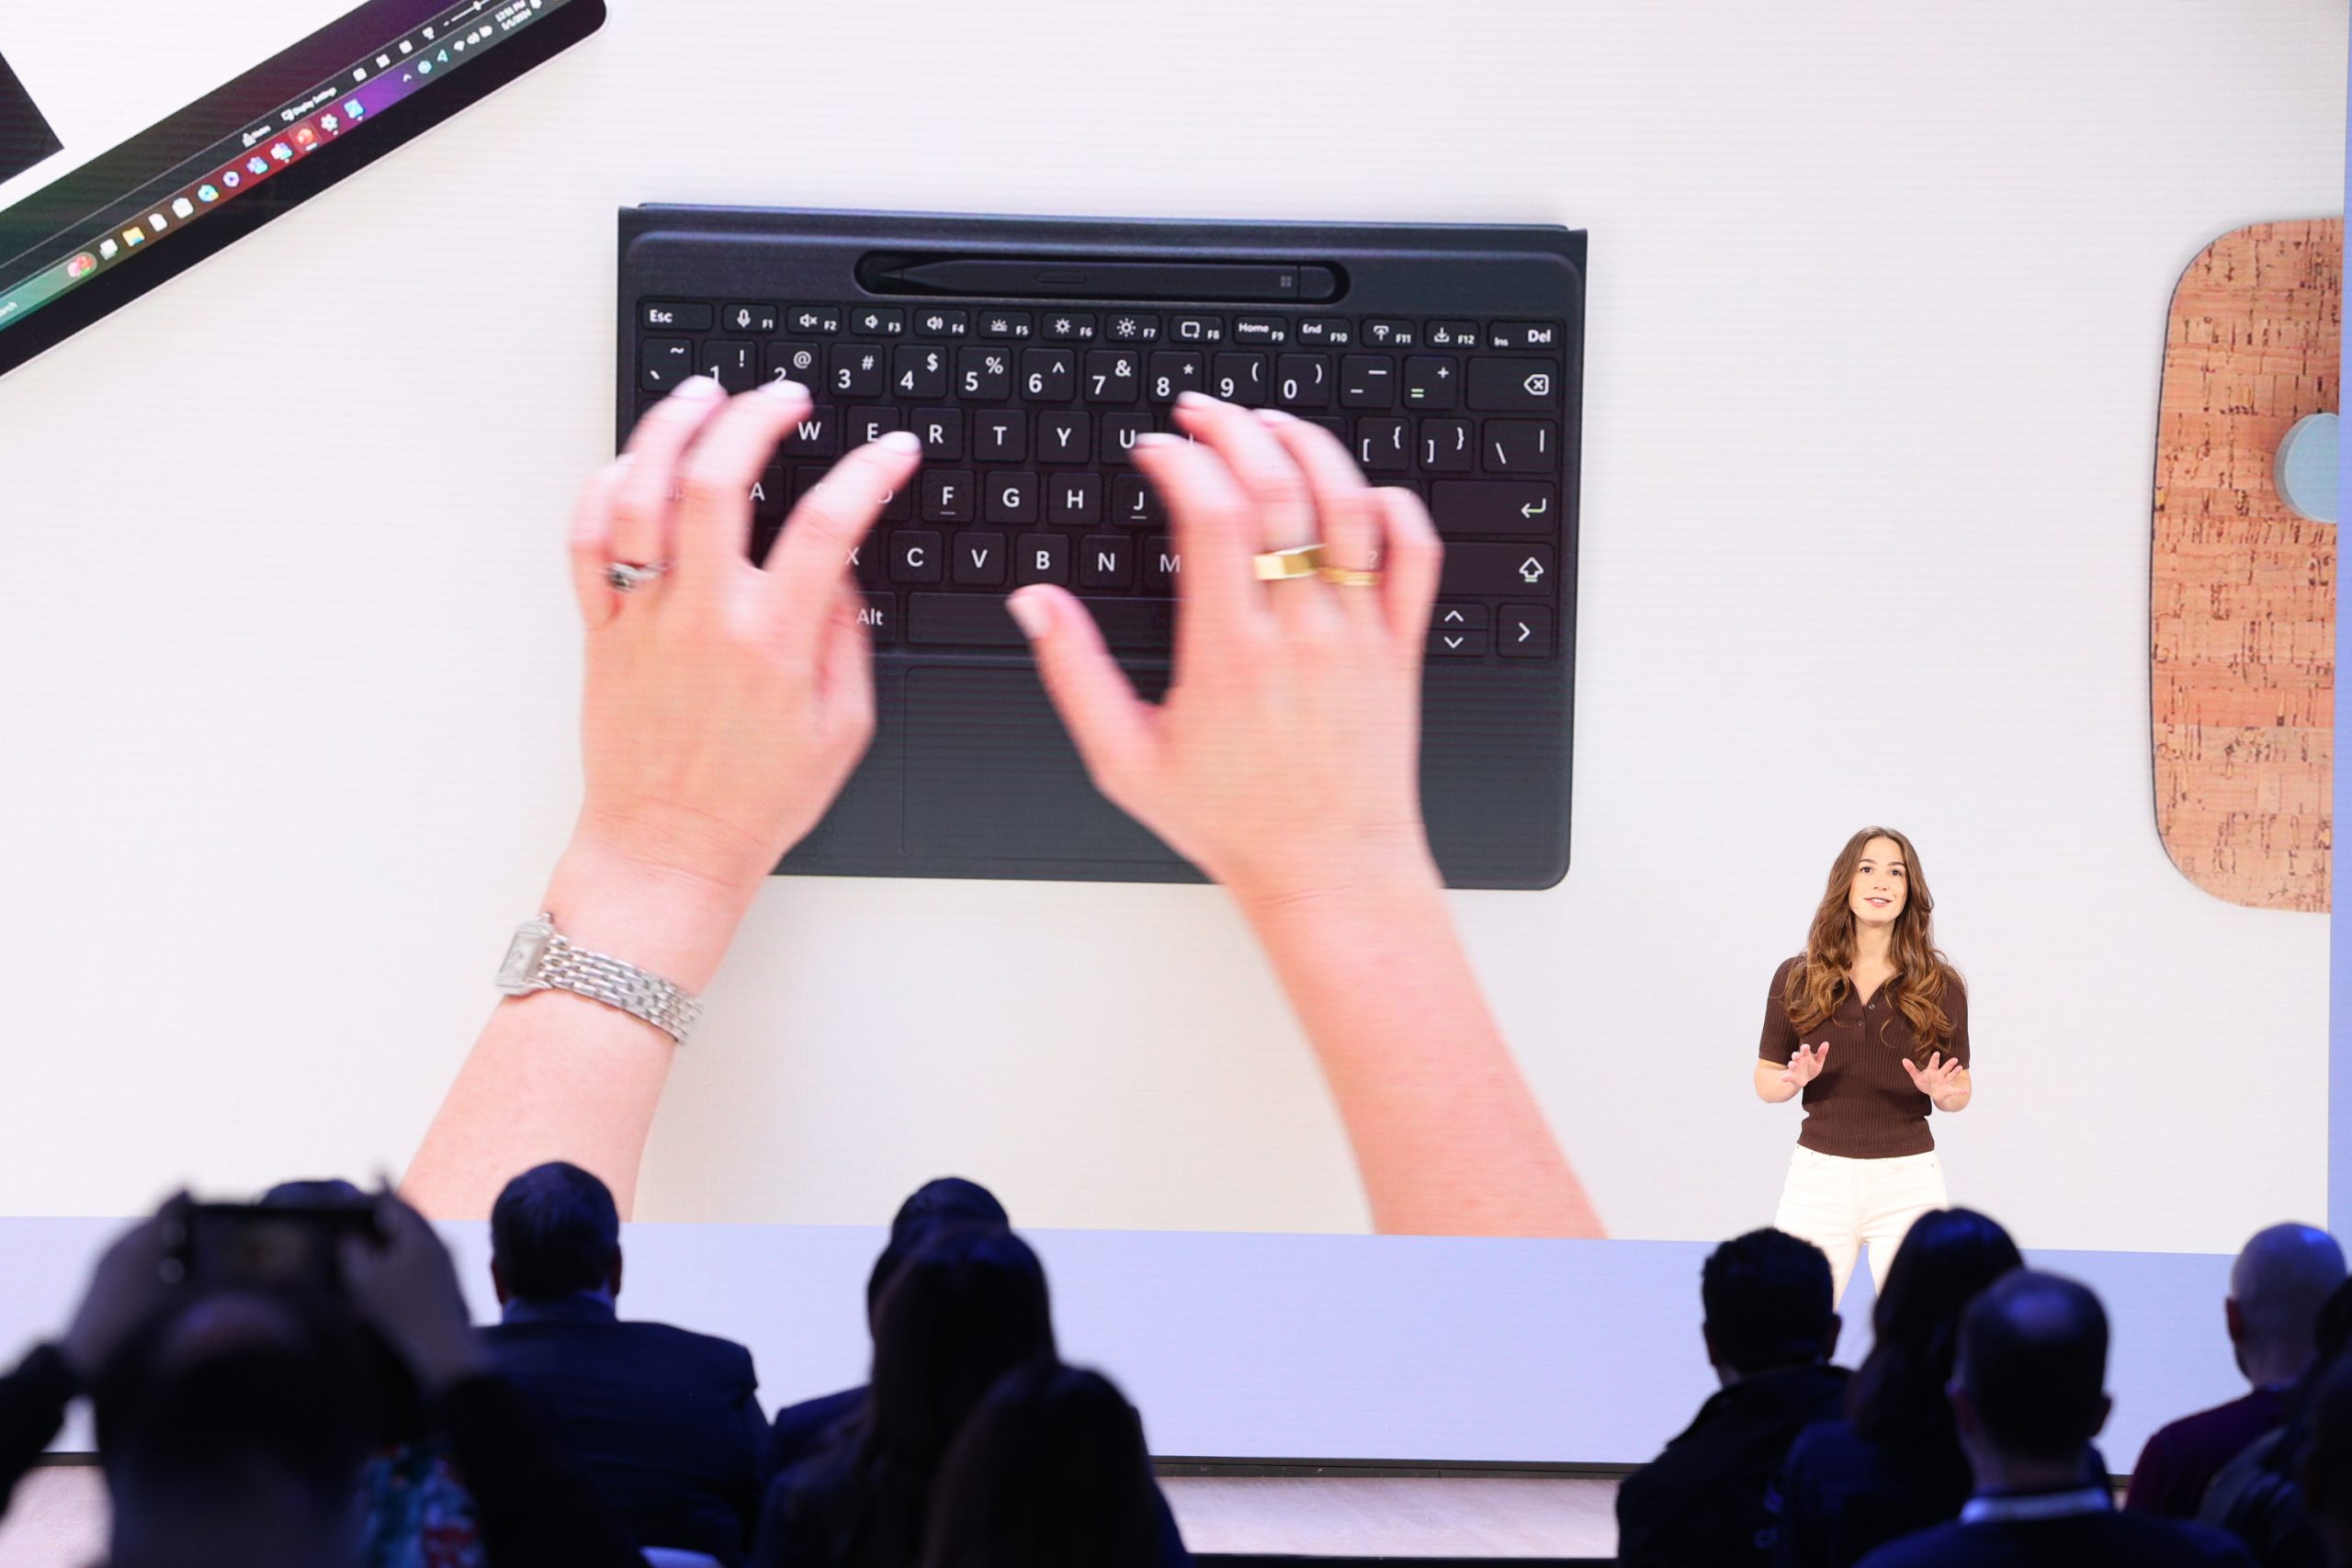 A woman standing on stage in front of an audience, with an image of hands typing on a keyboard on the screen behind her.